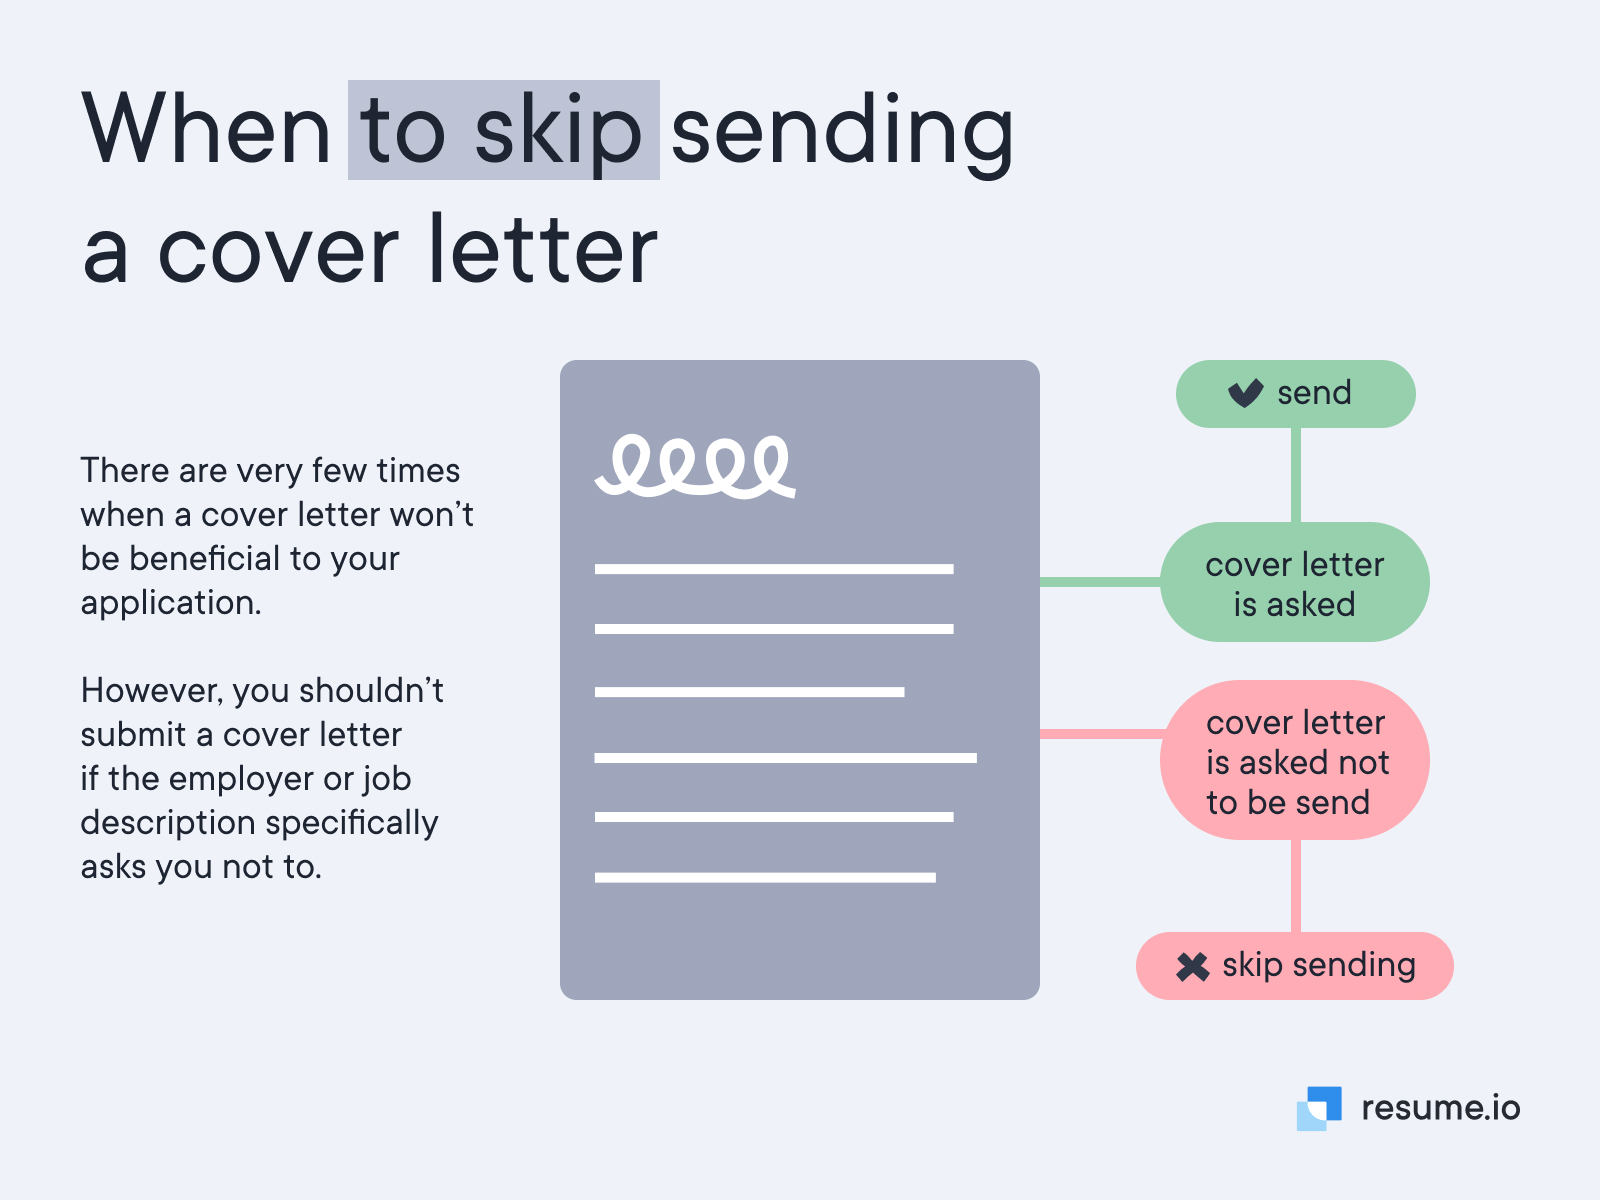 When to skip sending a cover letter